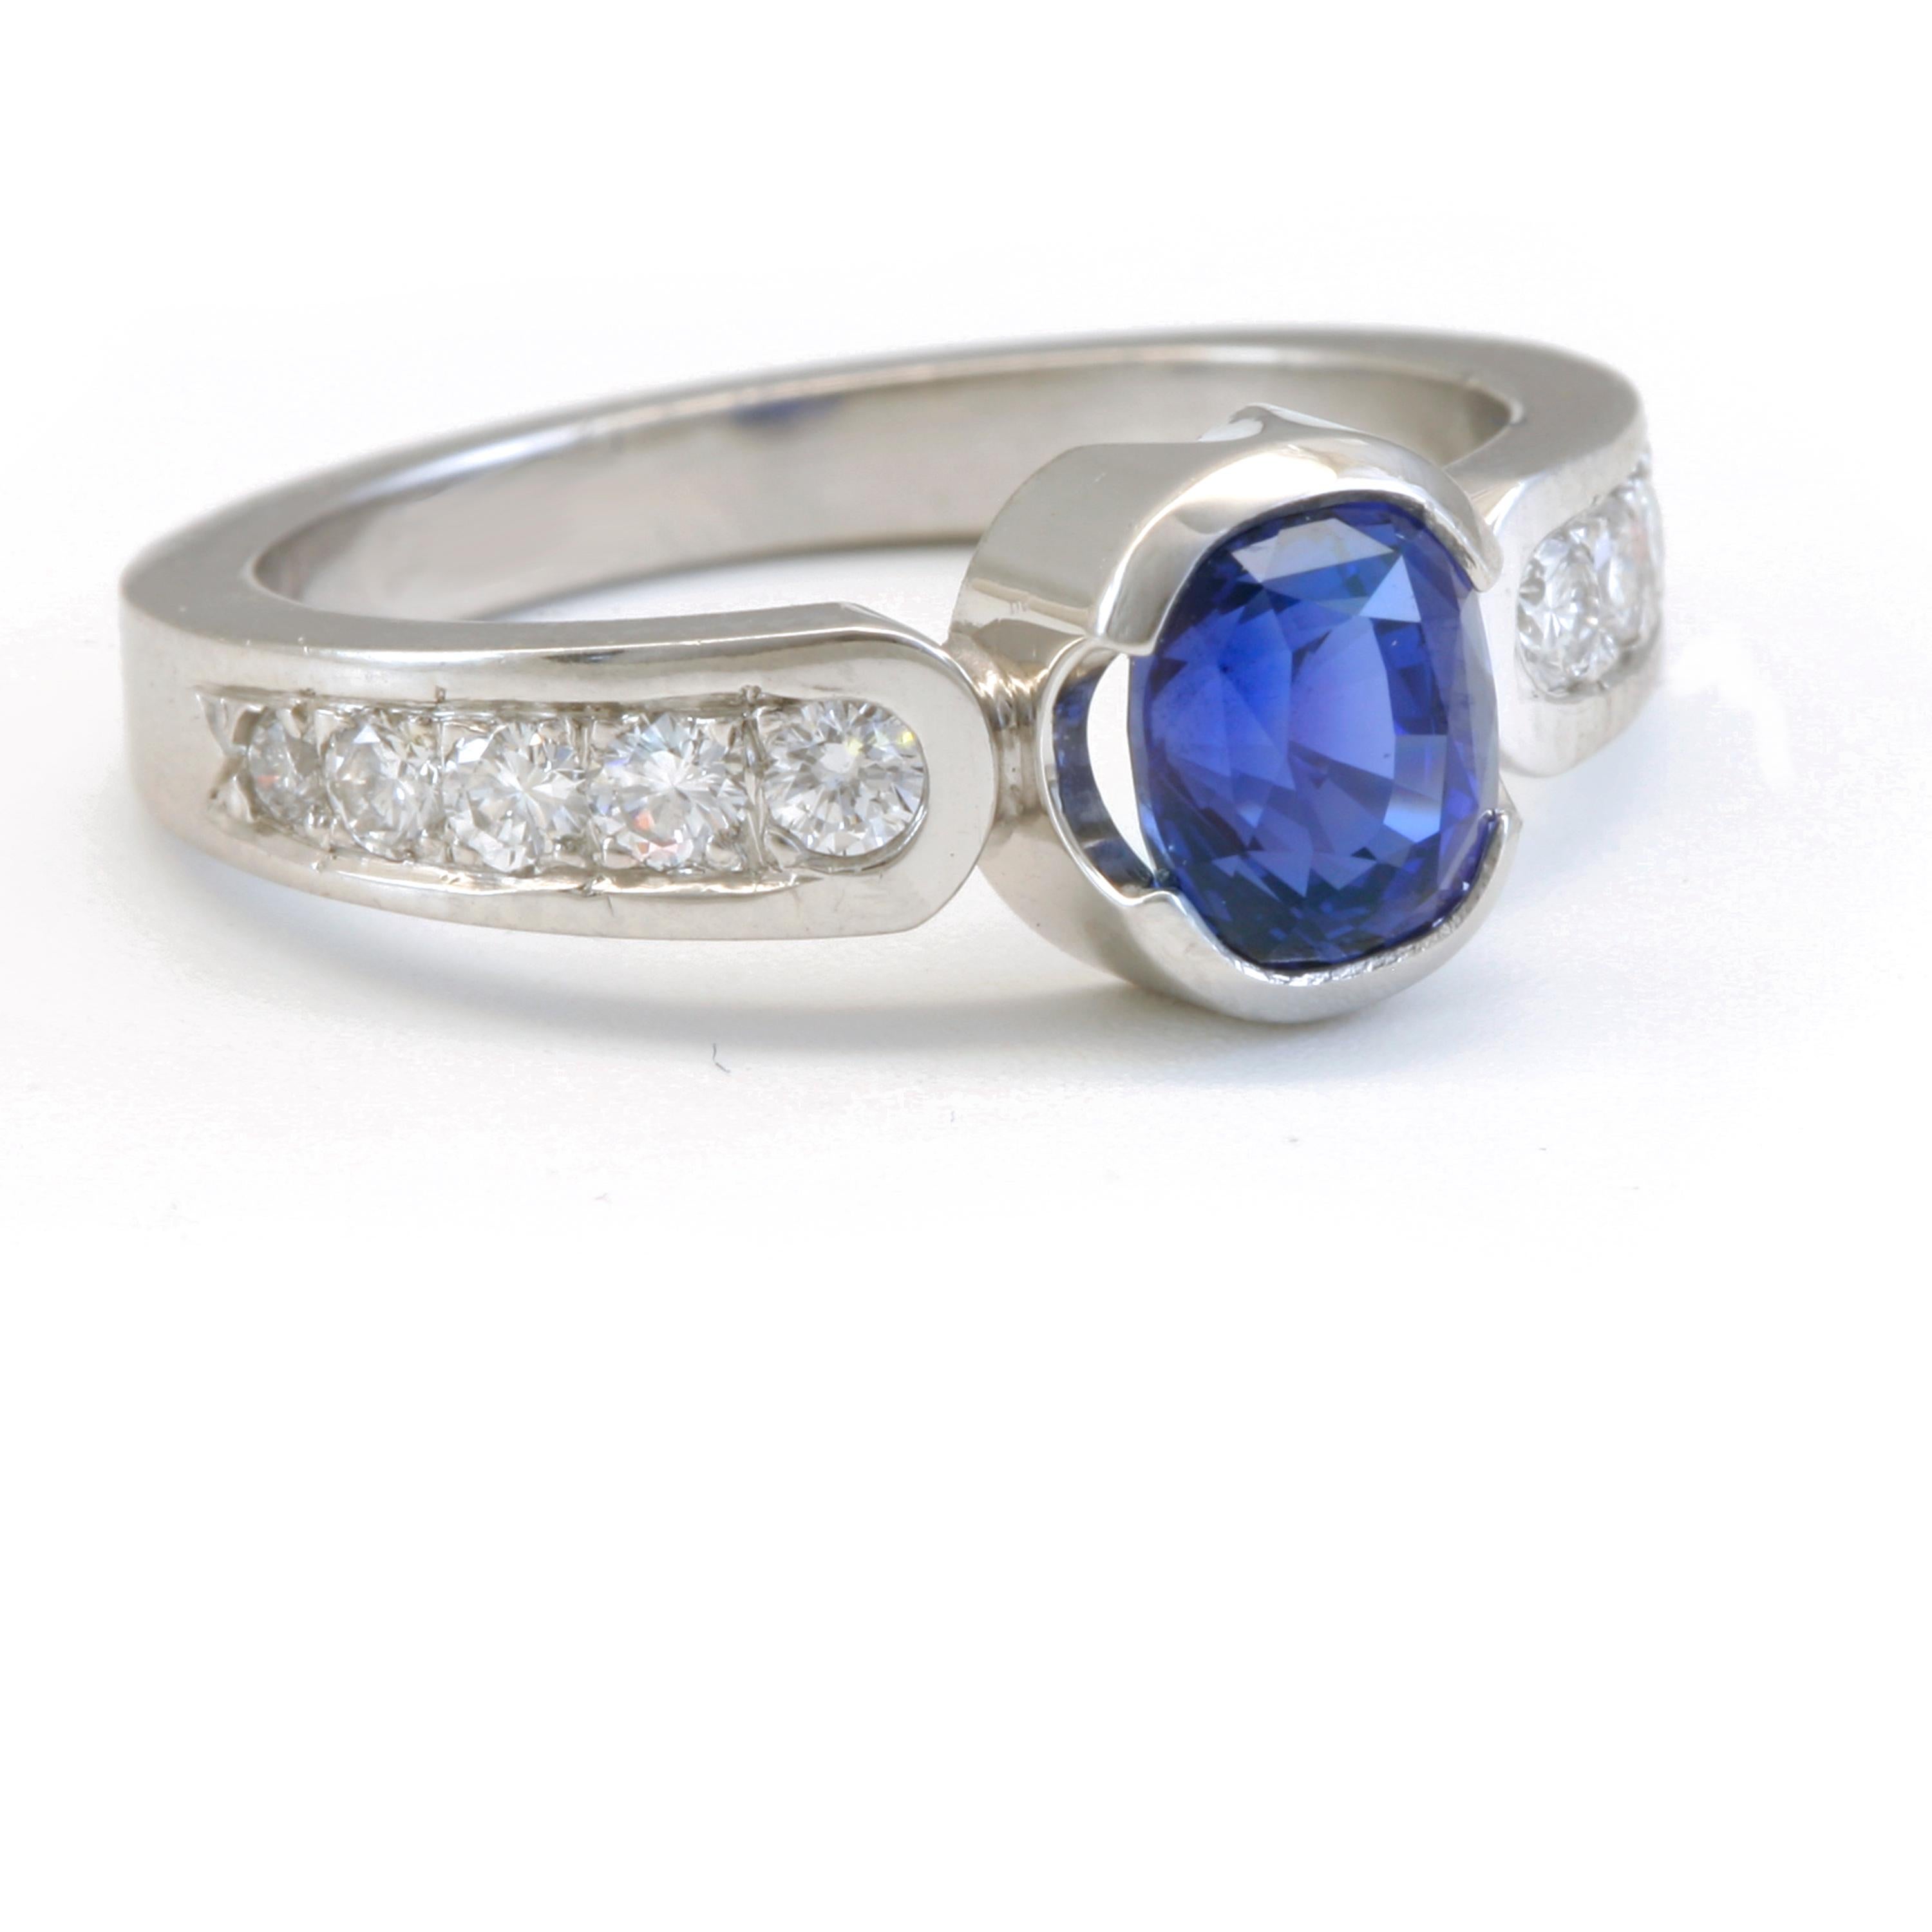 1.56 Carat Blue Sapphire with .34 ctw Diamonds in Platinum. Tapered band, 4 x 3mm band.